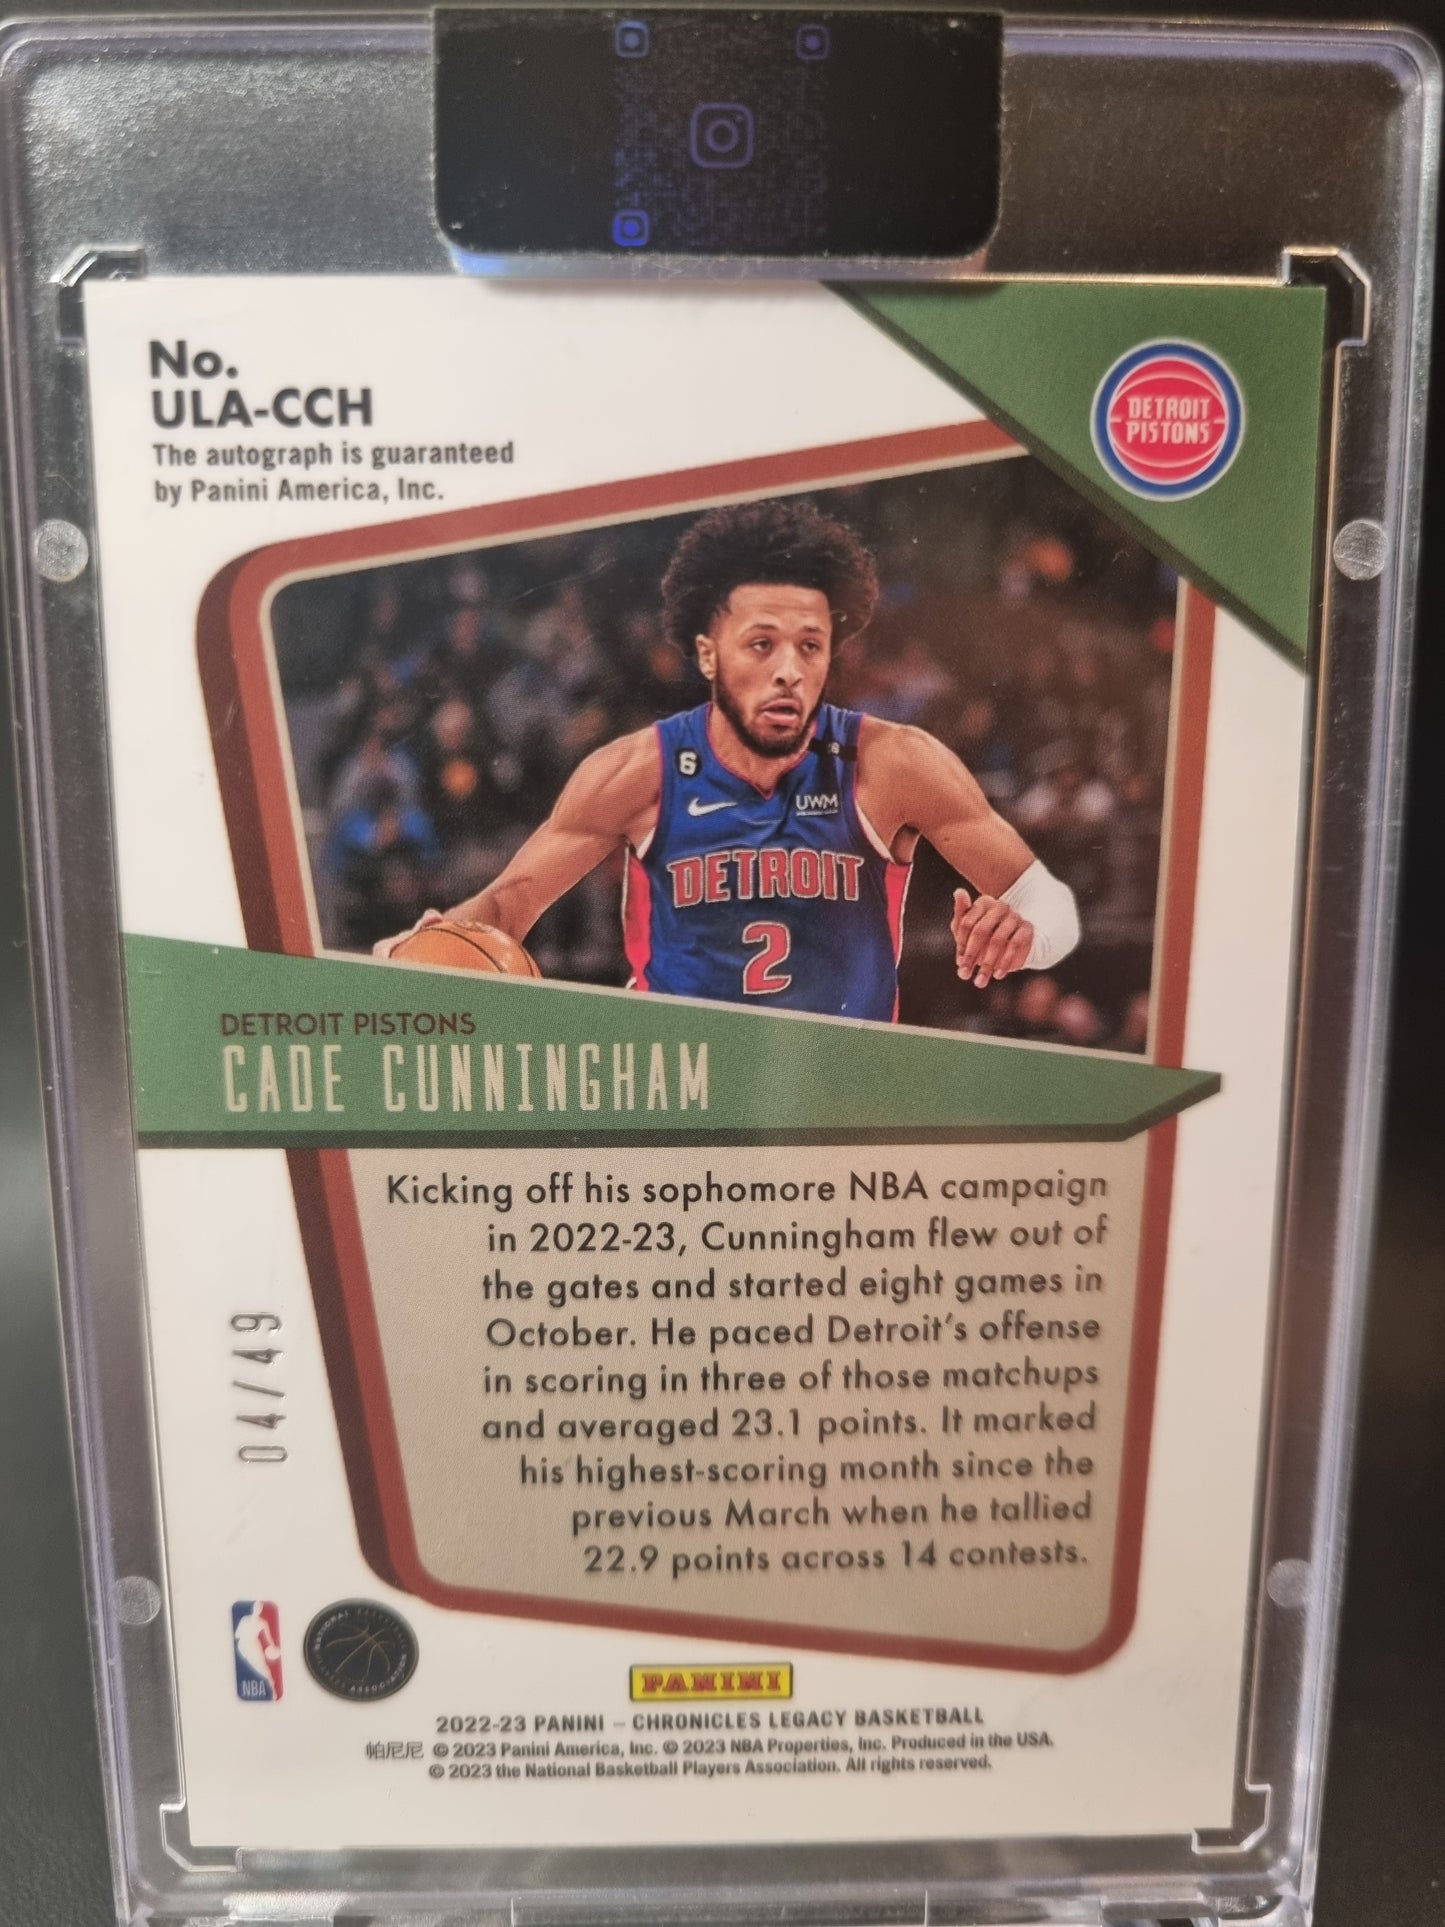 2022-23 Panini Chronicles Legacy #ULA- CCH Cade Cunningham Under The Lights Autograph 04/49